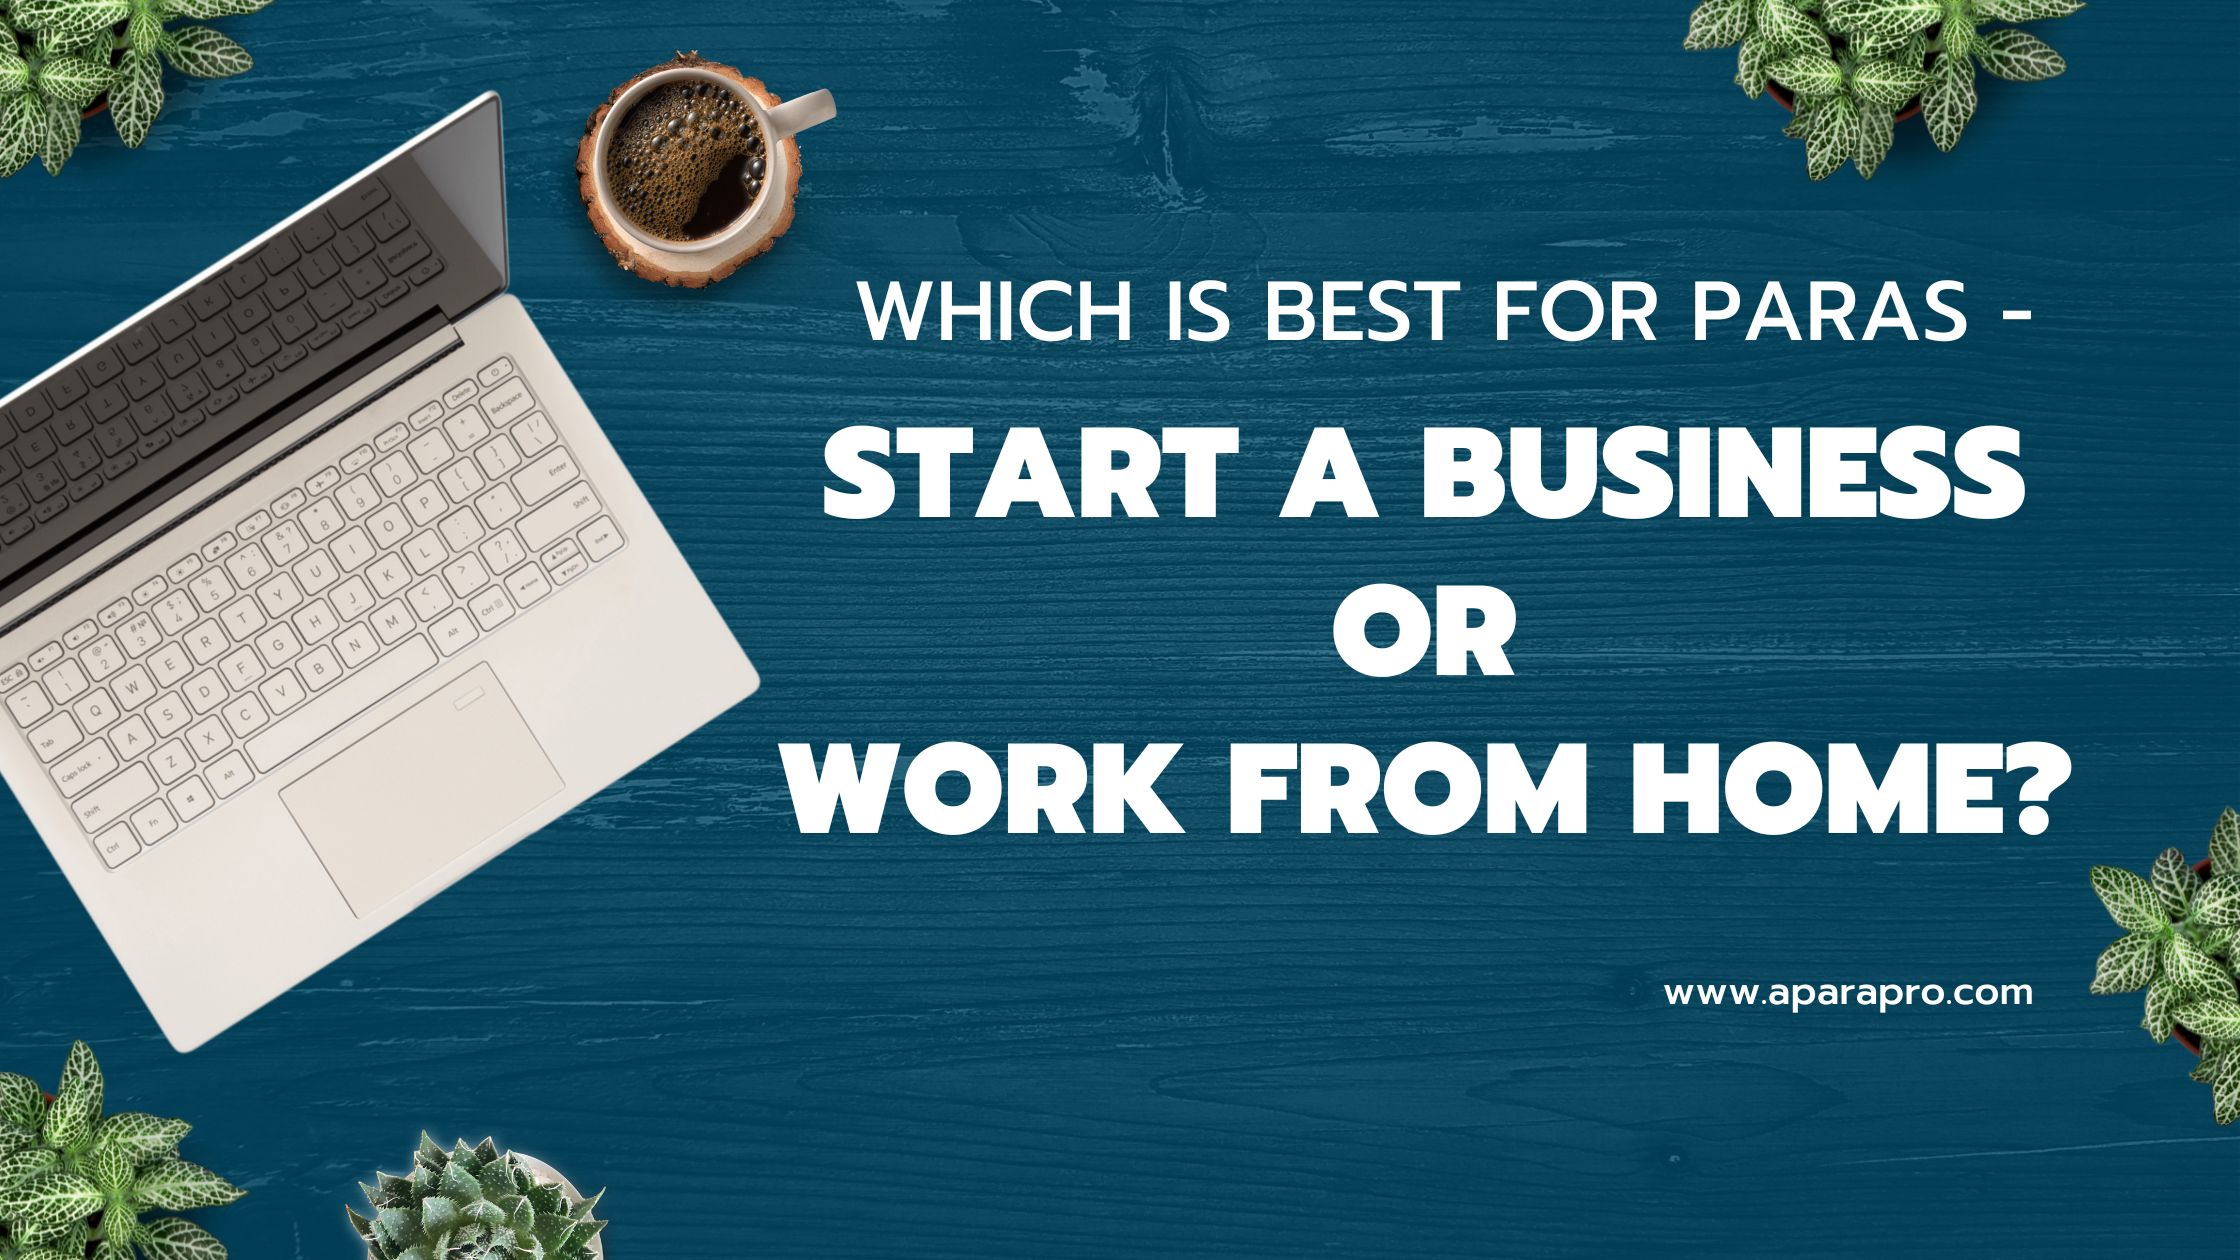 what is best for paras, stat a business or work from home? A Para Pro helps paras figure out what is the best route for them to supplement their para pay.